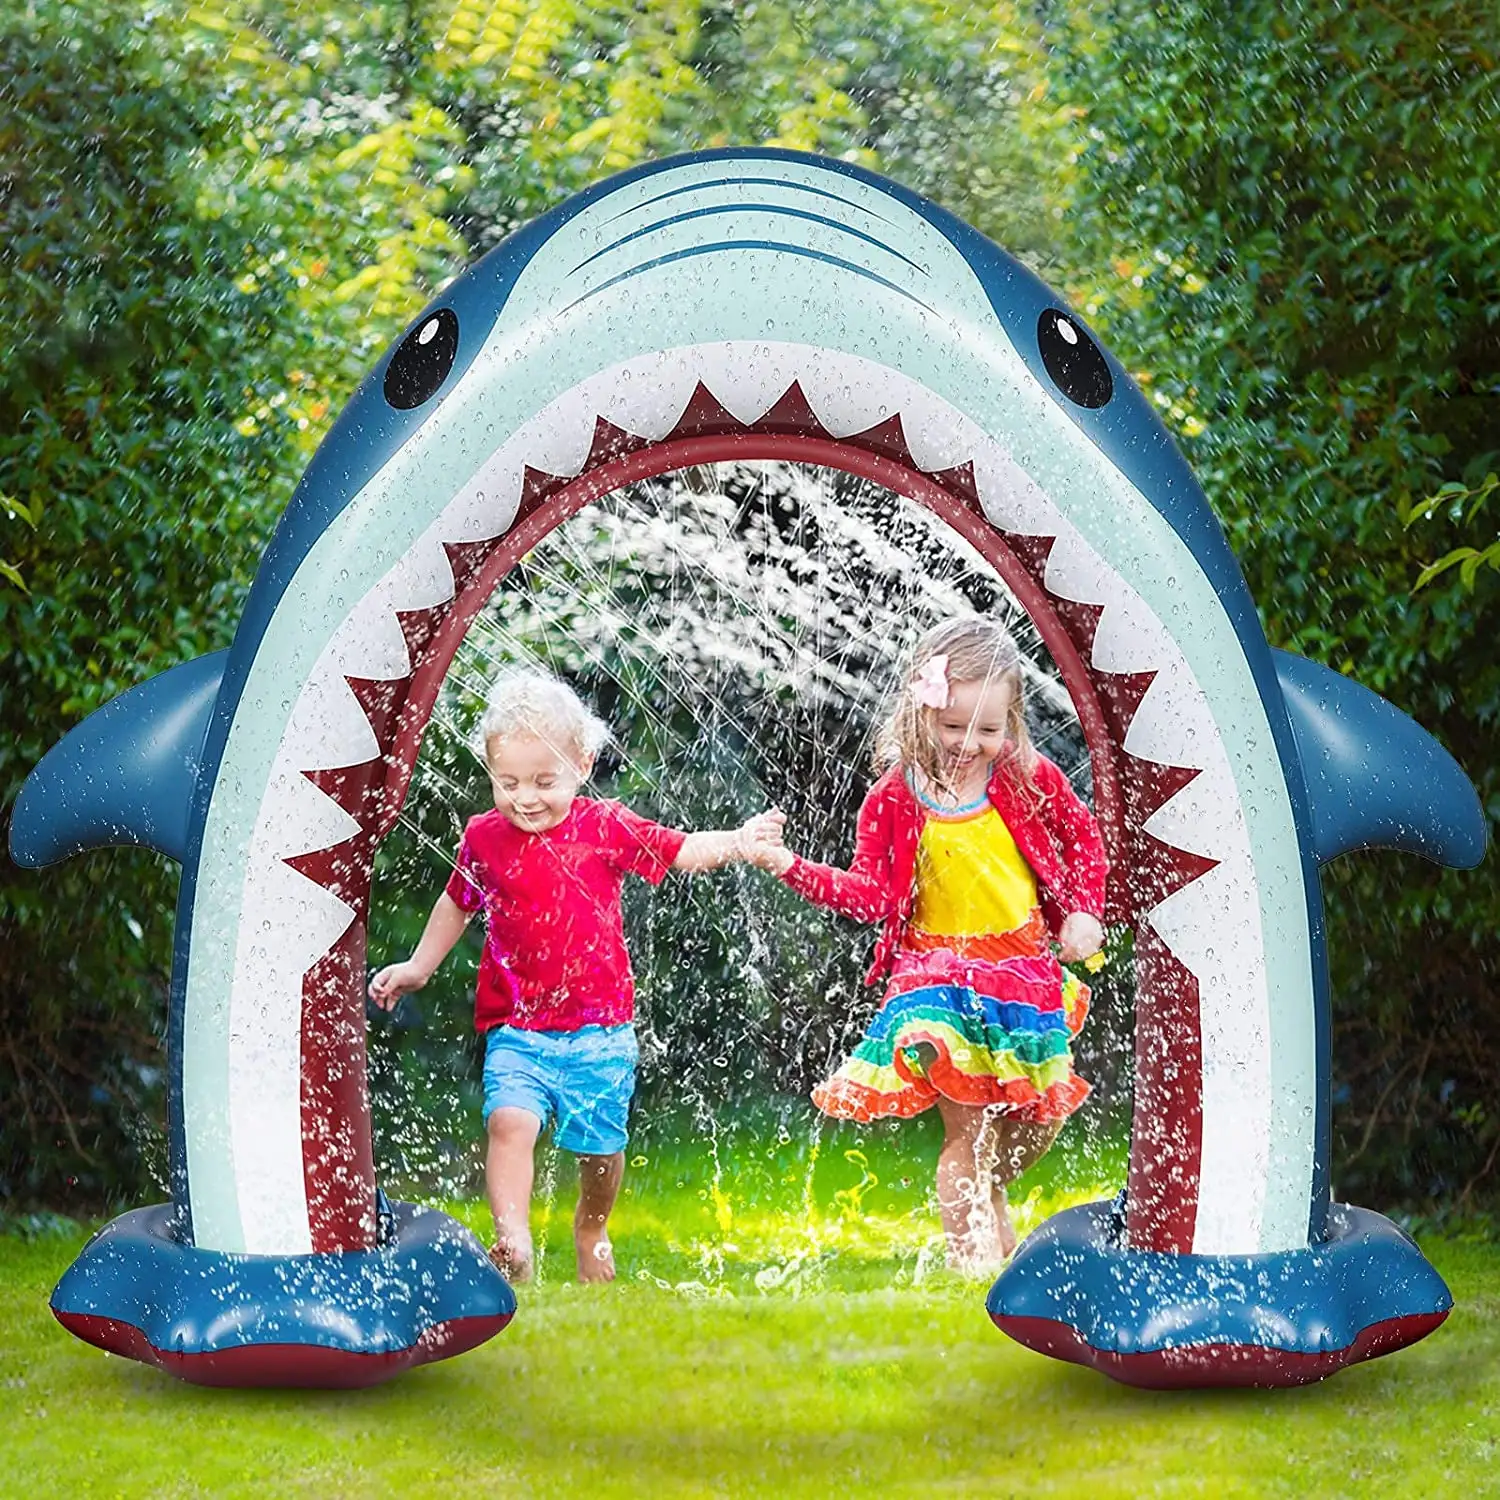 Large Shark inflatable Sprinkler Kids Inflatable Water Toy Summer Outdoor Play Sprinkler inflatable water toys games